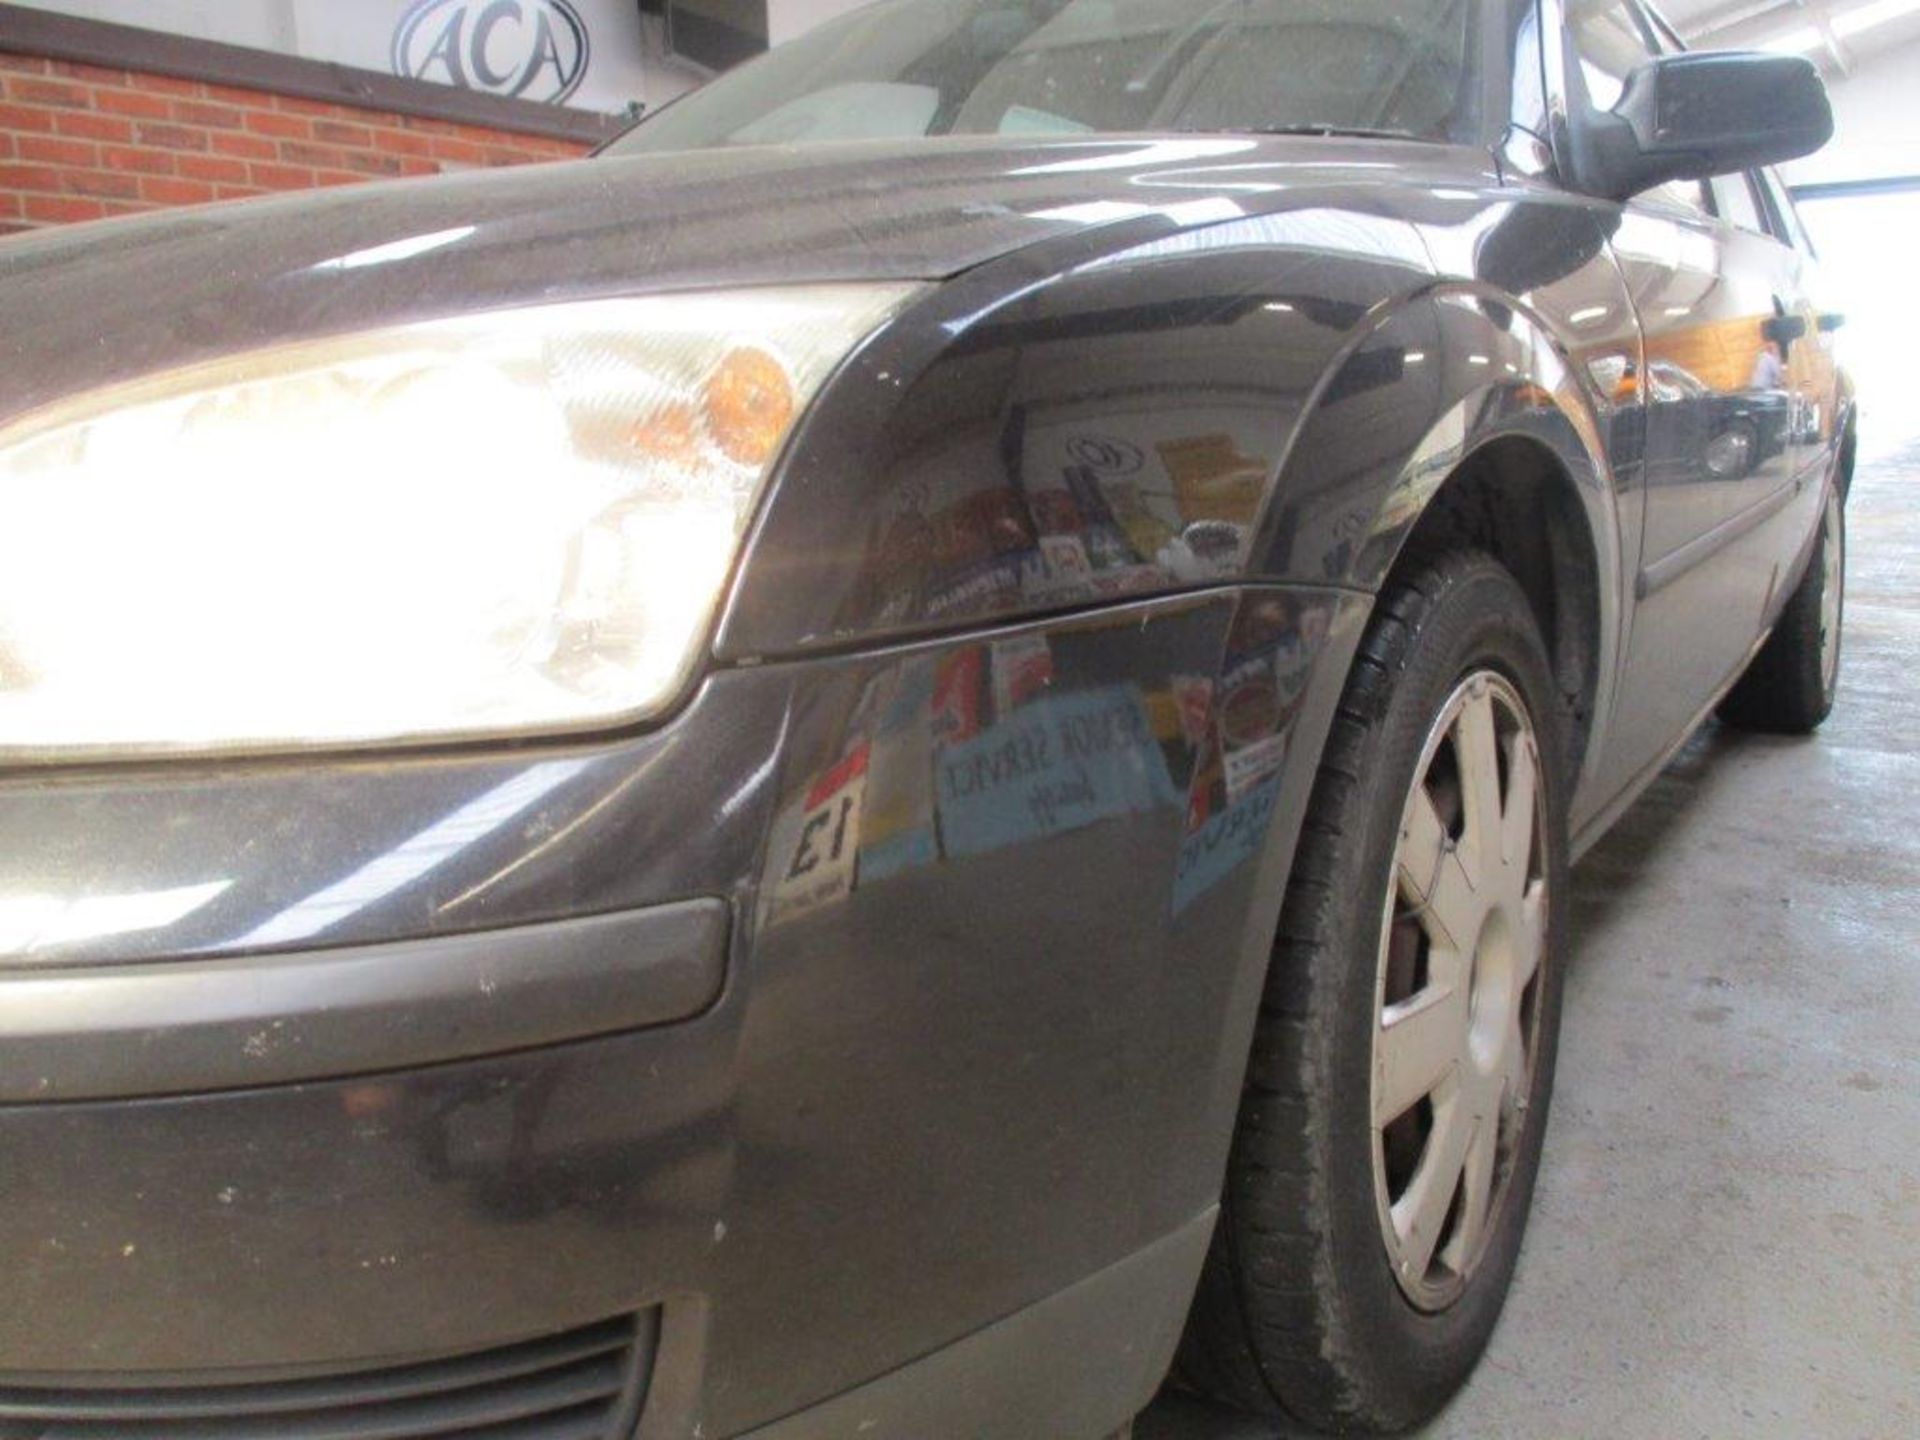 55 06 Ford Mondeo LX - Image 7 of 18